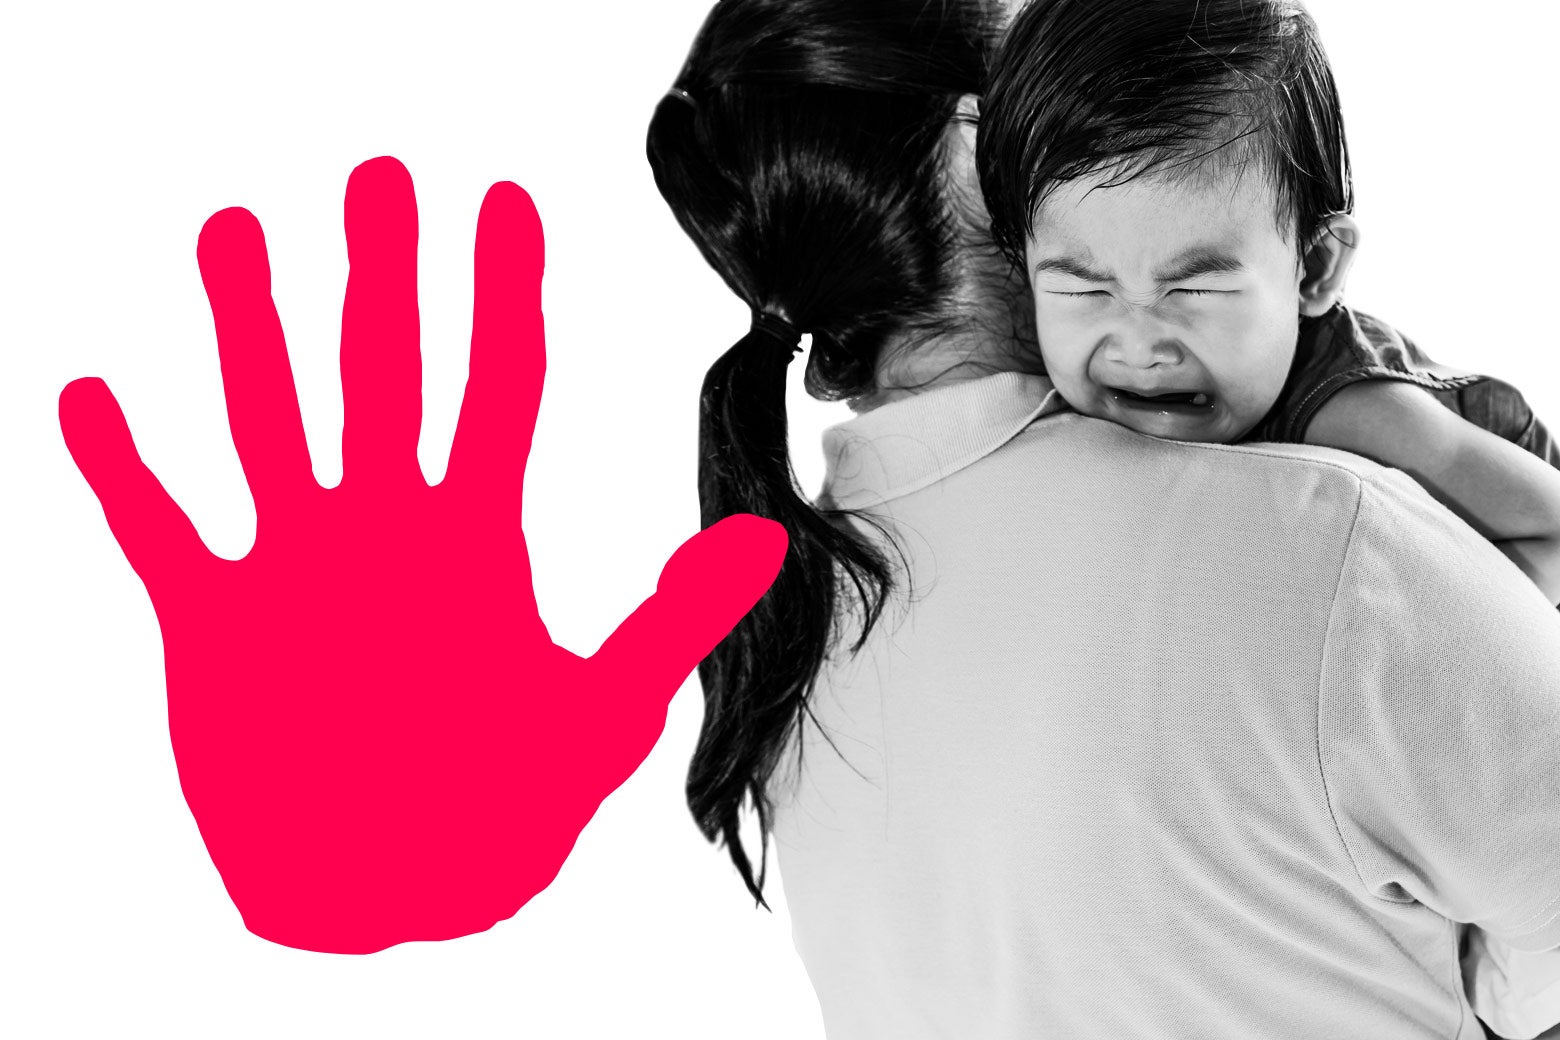 My father-in-law pushed my 3-year-old daughter, and more advice from Dear Prudence. image